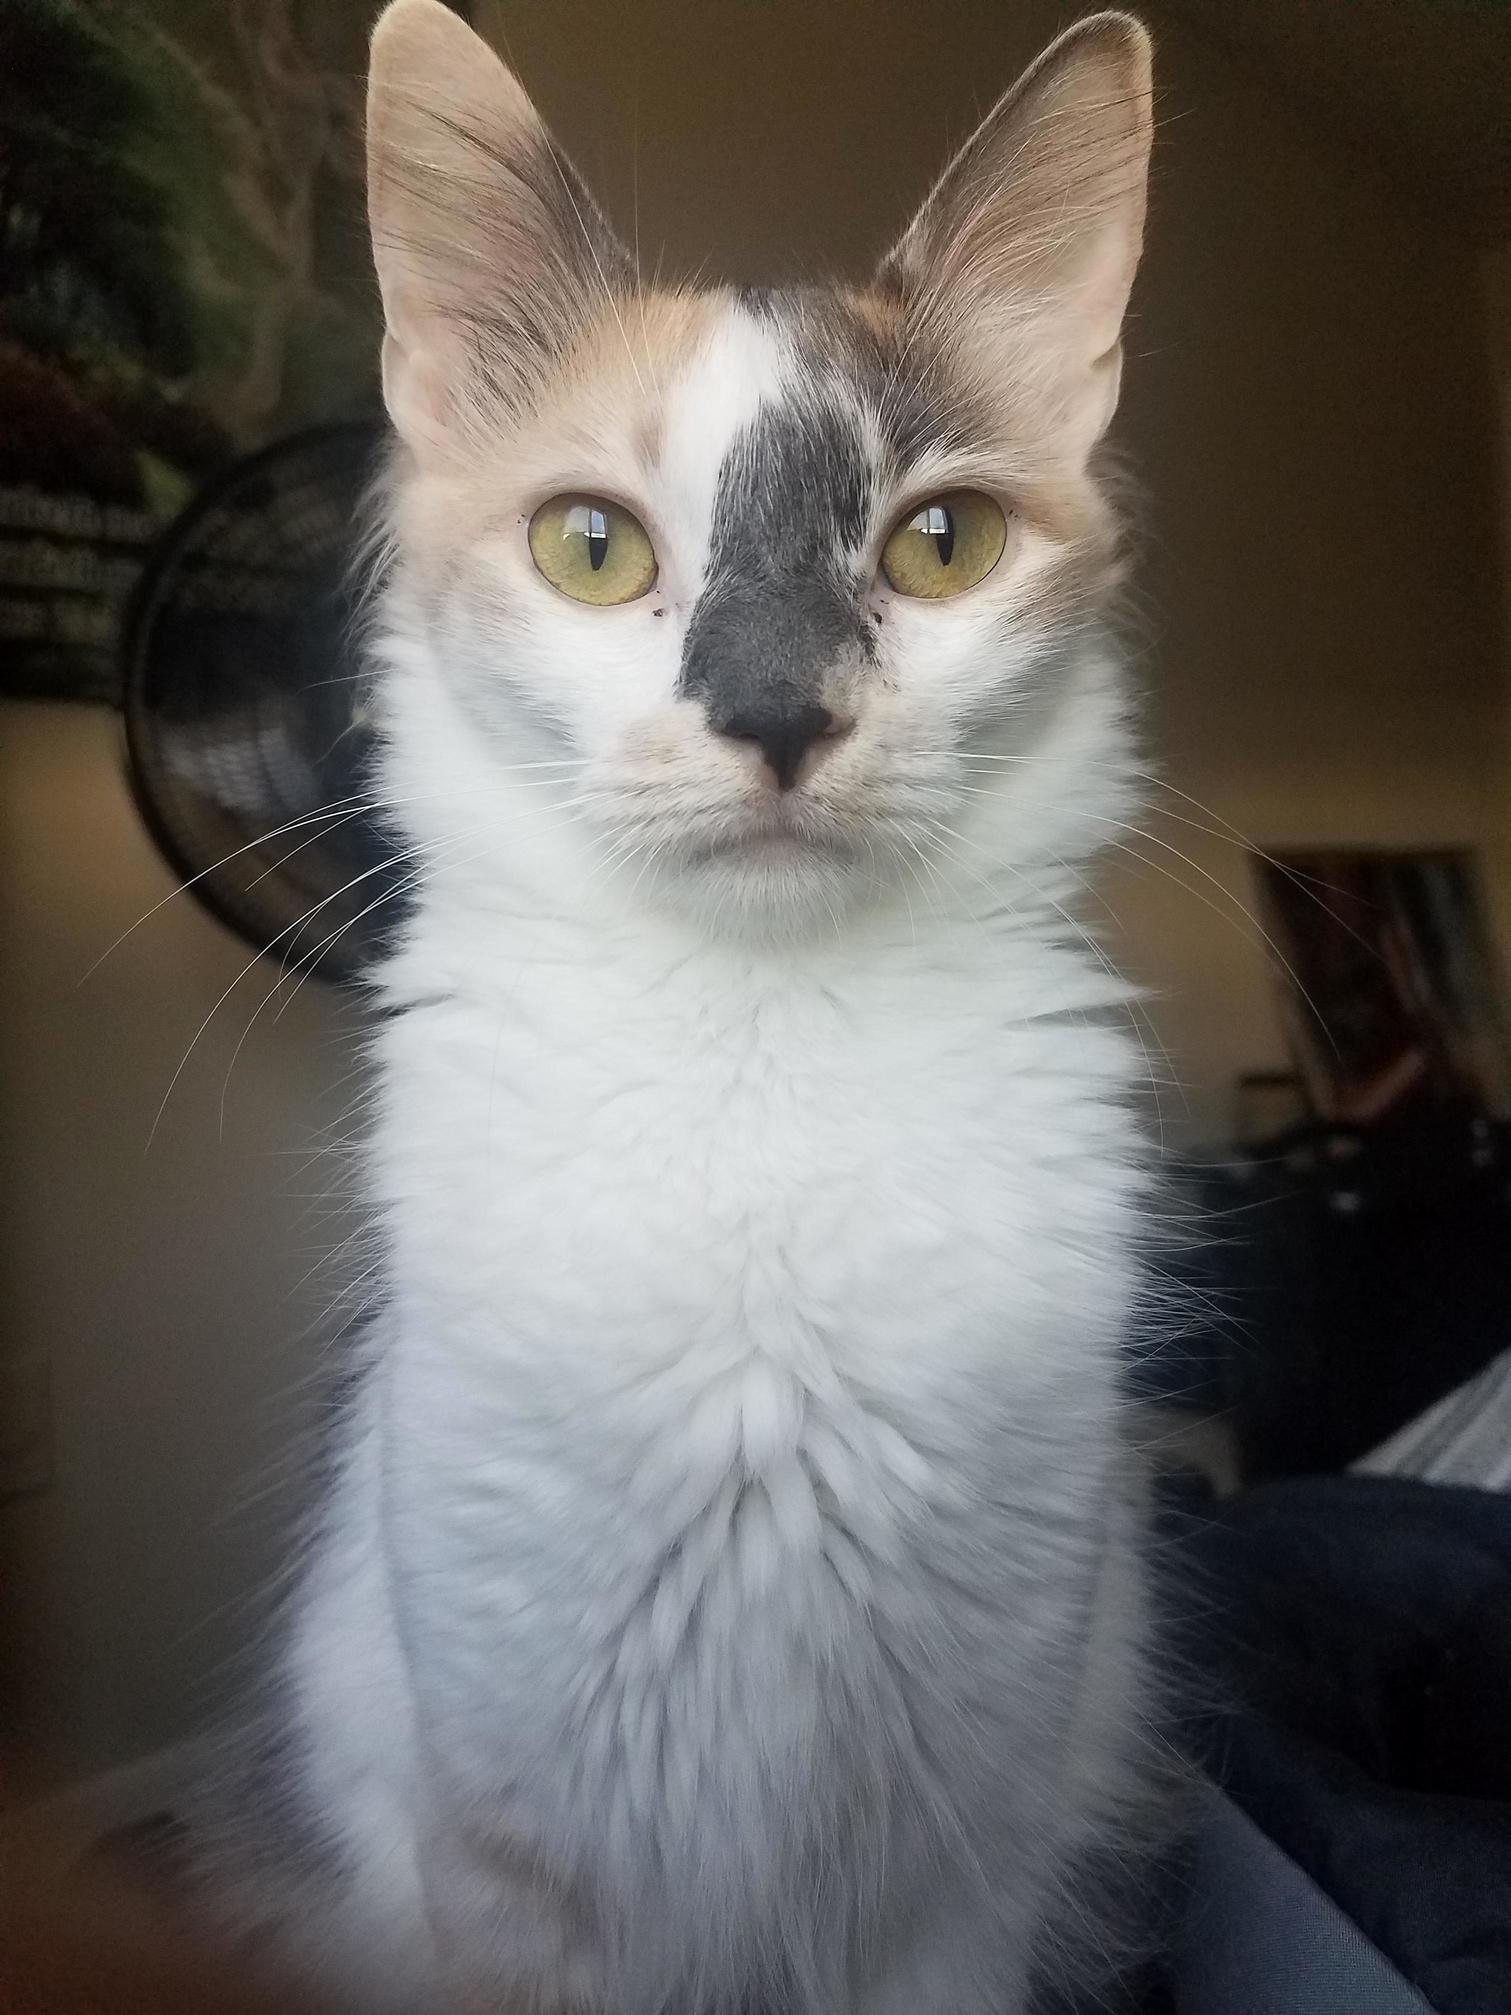 When your sweet cat looks like shes seem some shit.